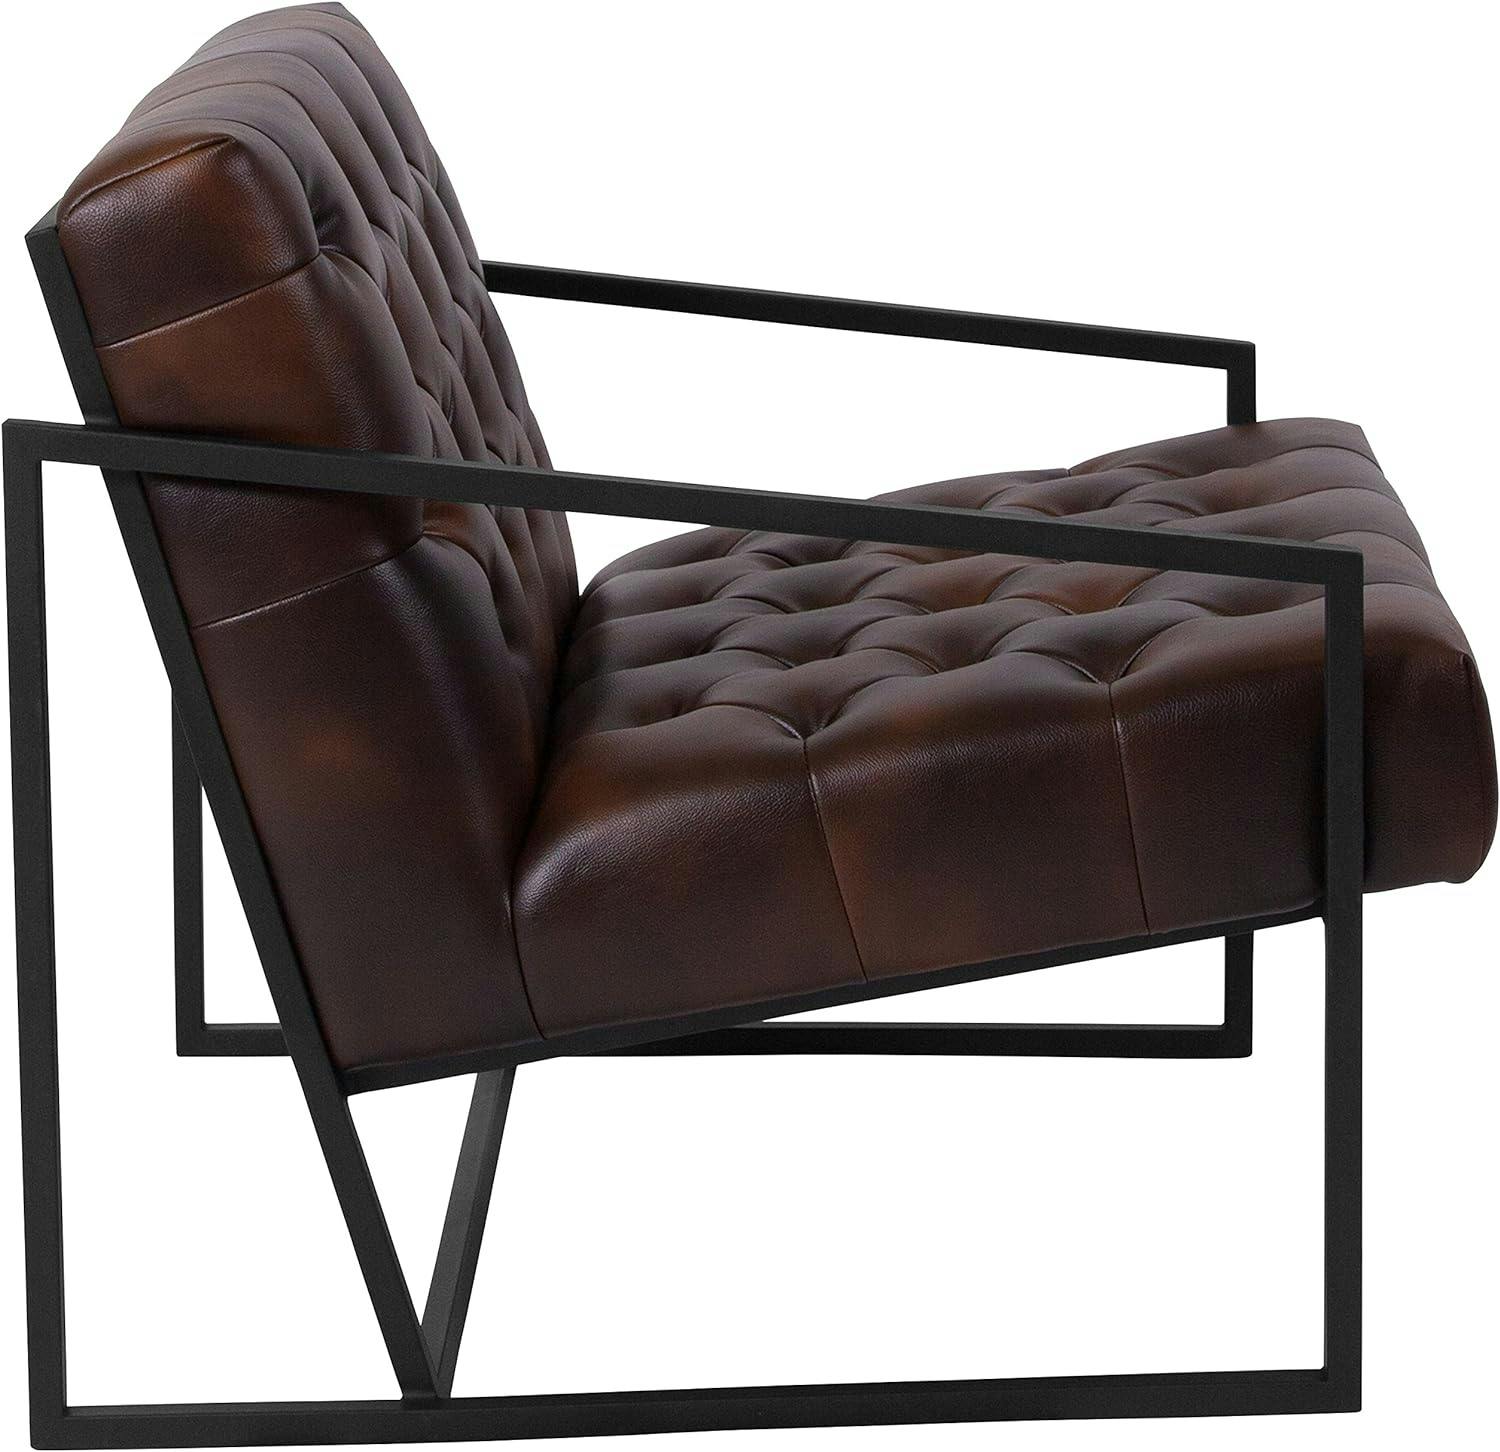 Transitional Bomber Jacket Leather Tufted Black Lounge Chair